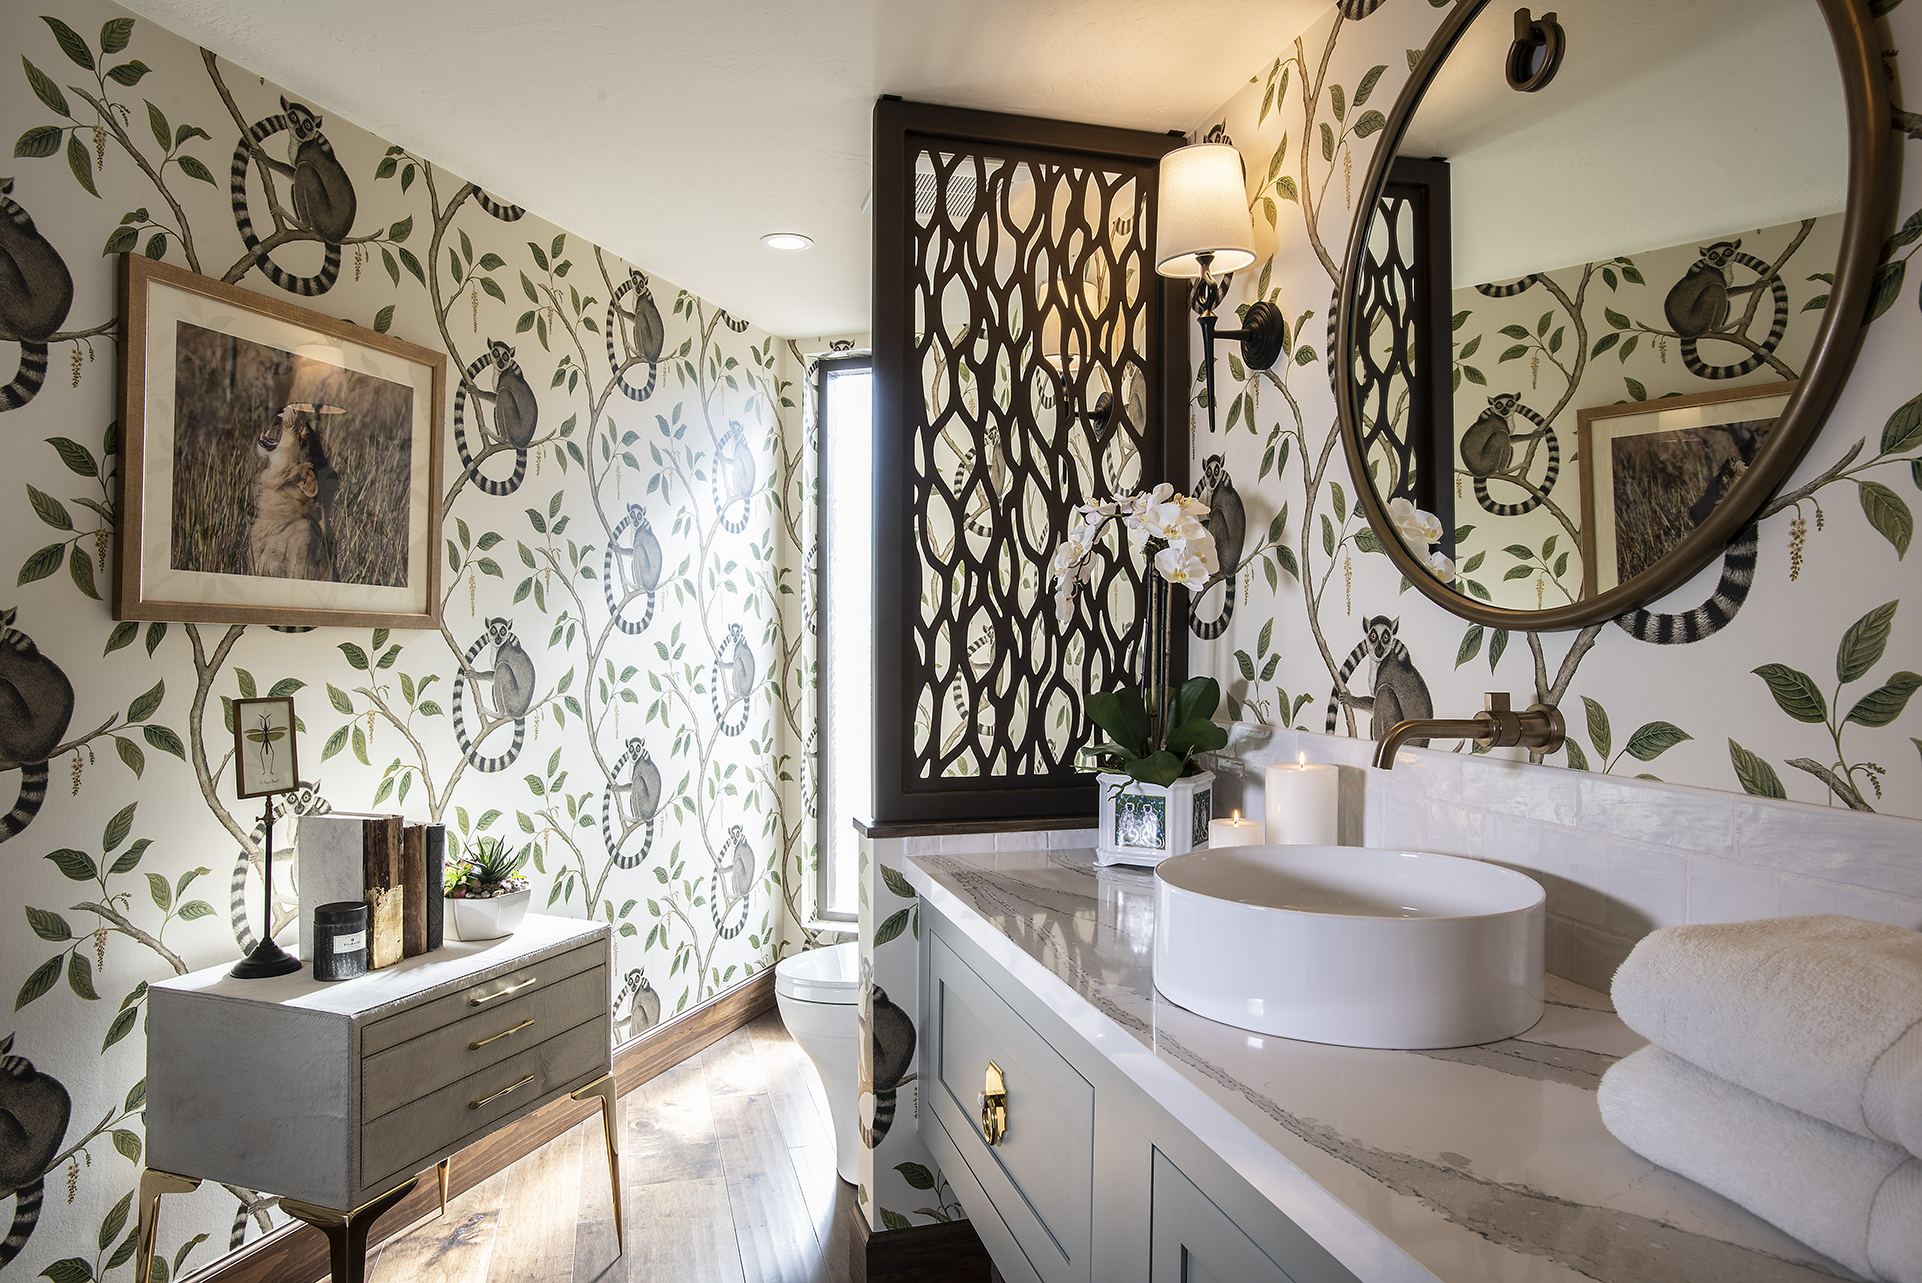 Scottsdale powder room design with exotic wallpaper, neutral white and gray colored vanity with large, round mirror.